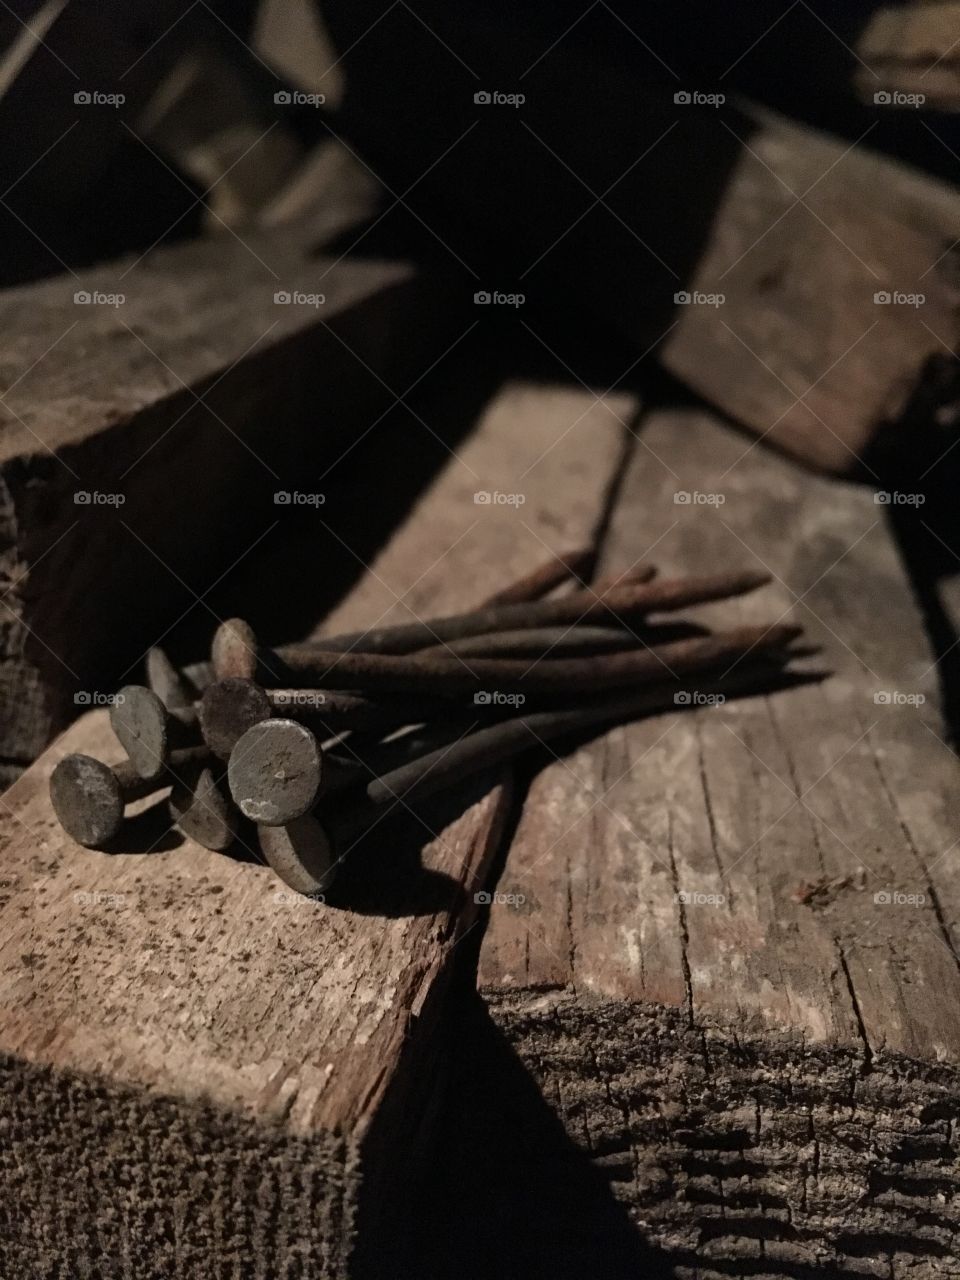 Some nails I found in this reclaimed redwood. 